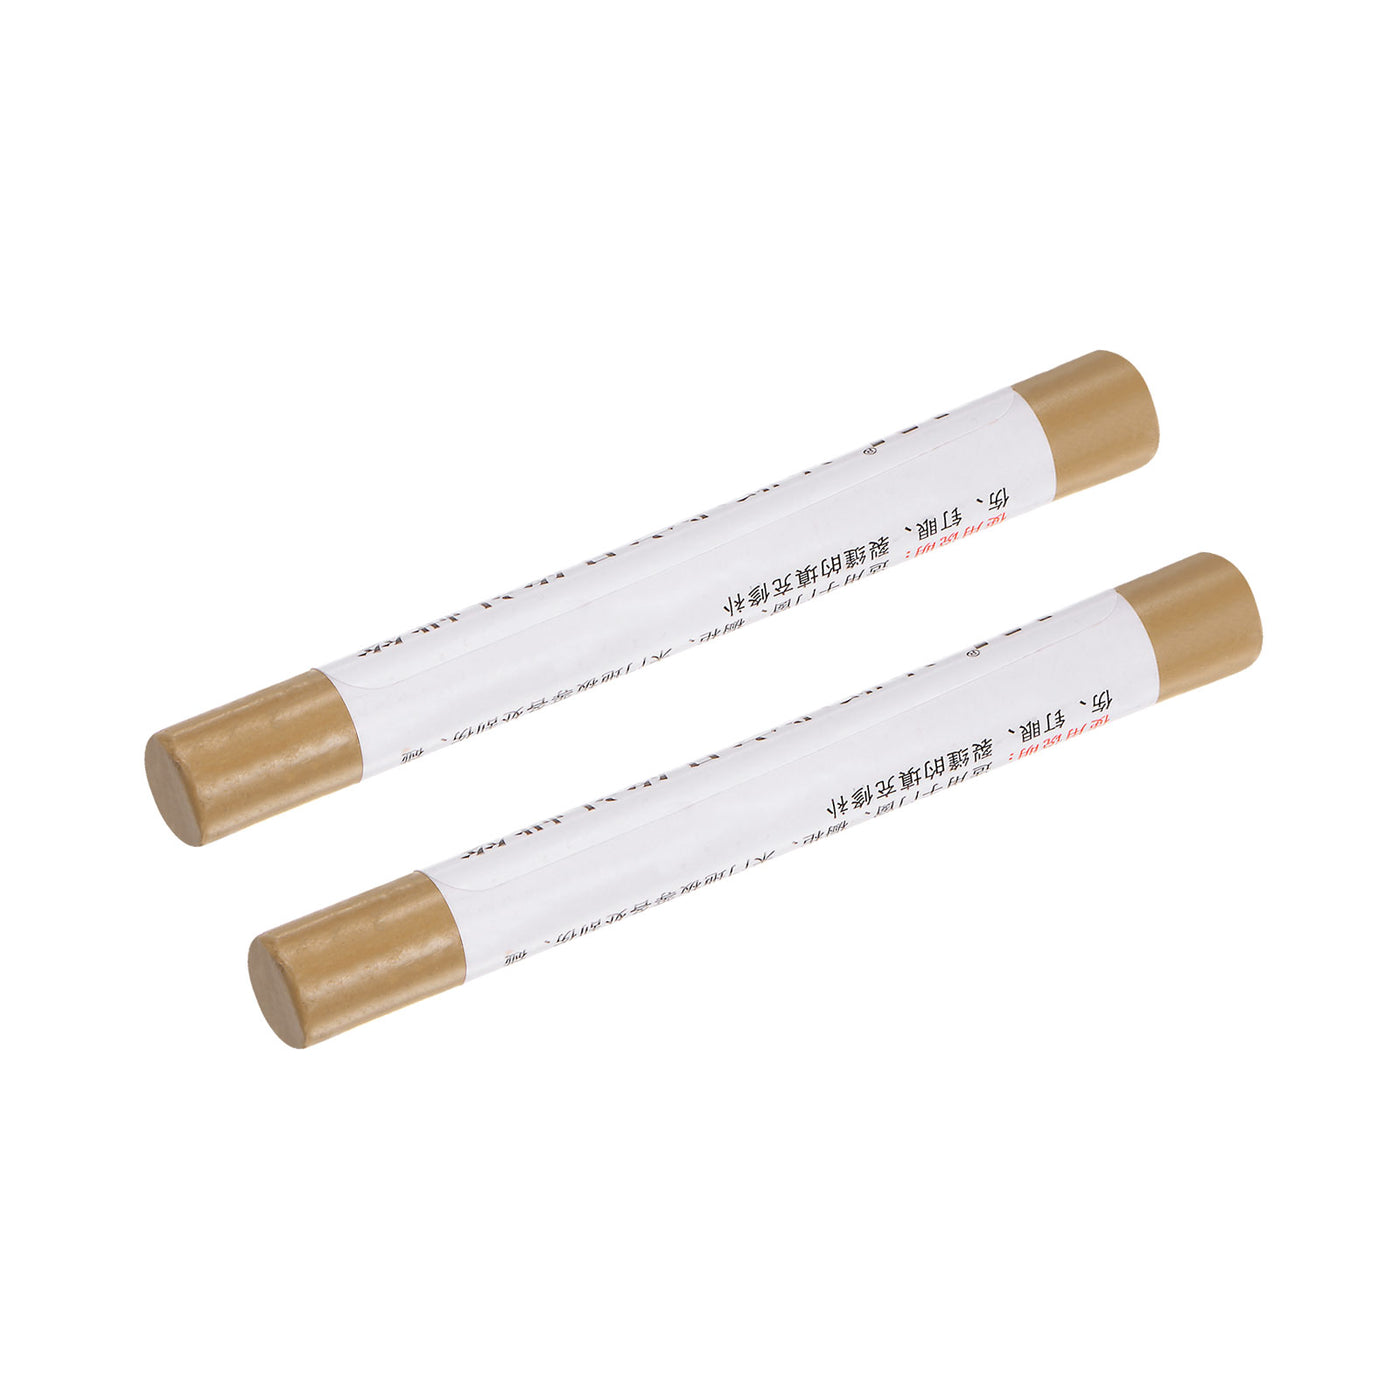 uxcell Uxcell Wood Wax Filler Stick Furniture Repairing Crayon Touch Up Pen 2Pcs, French Beige